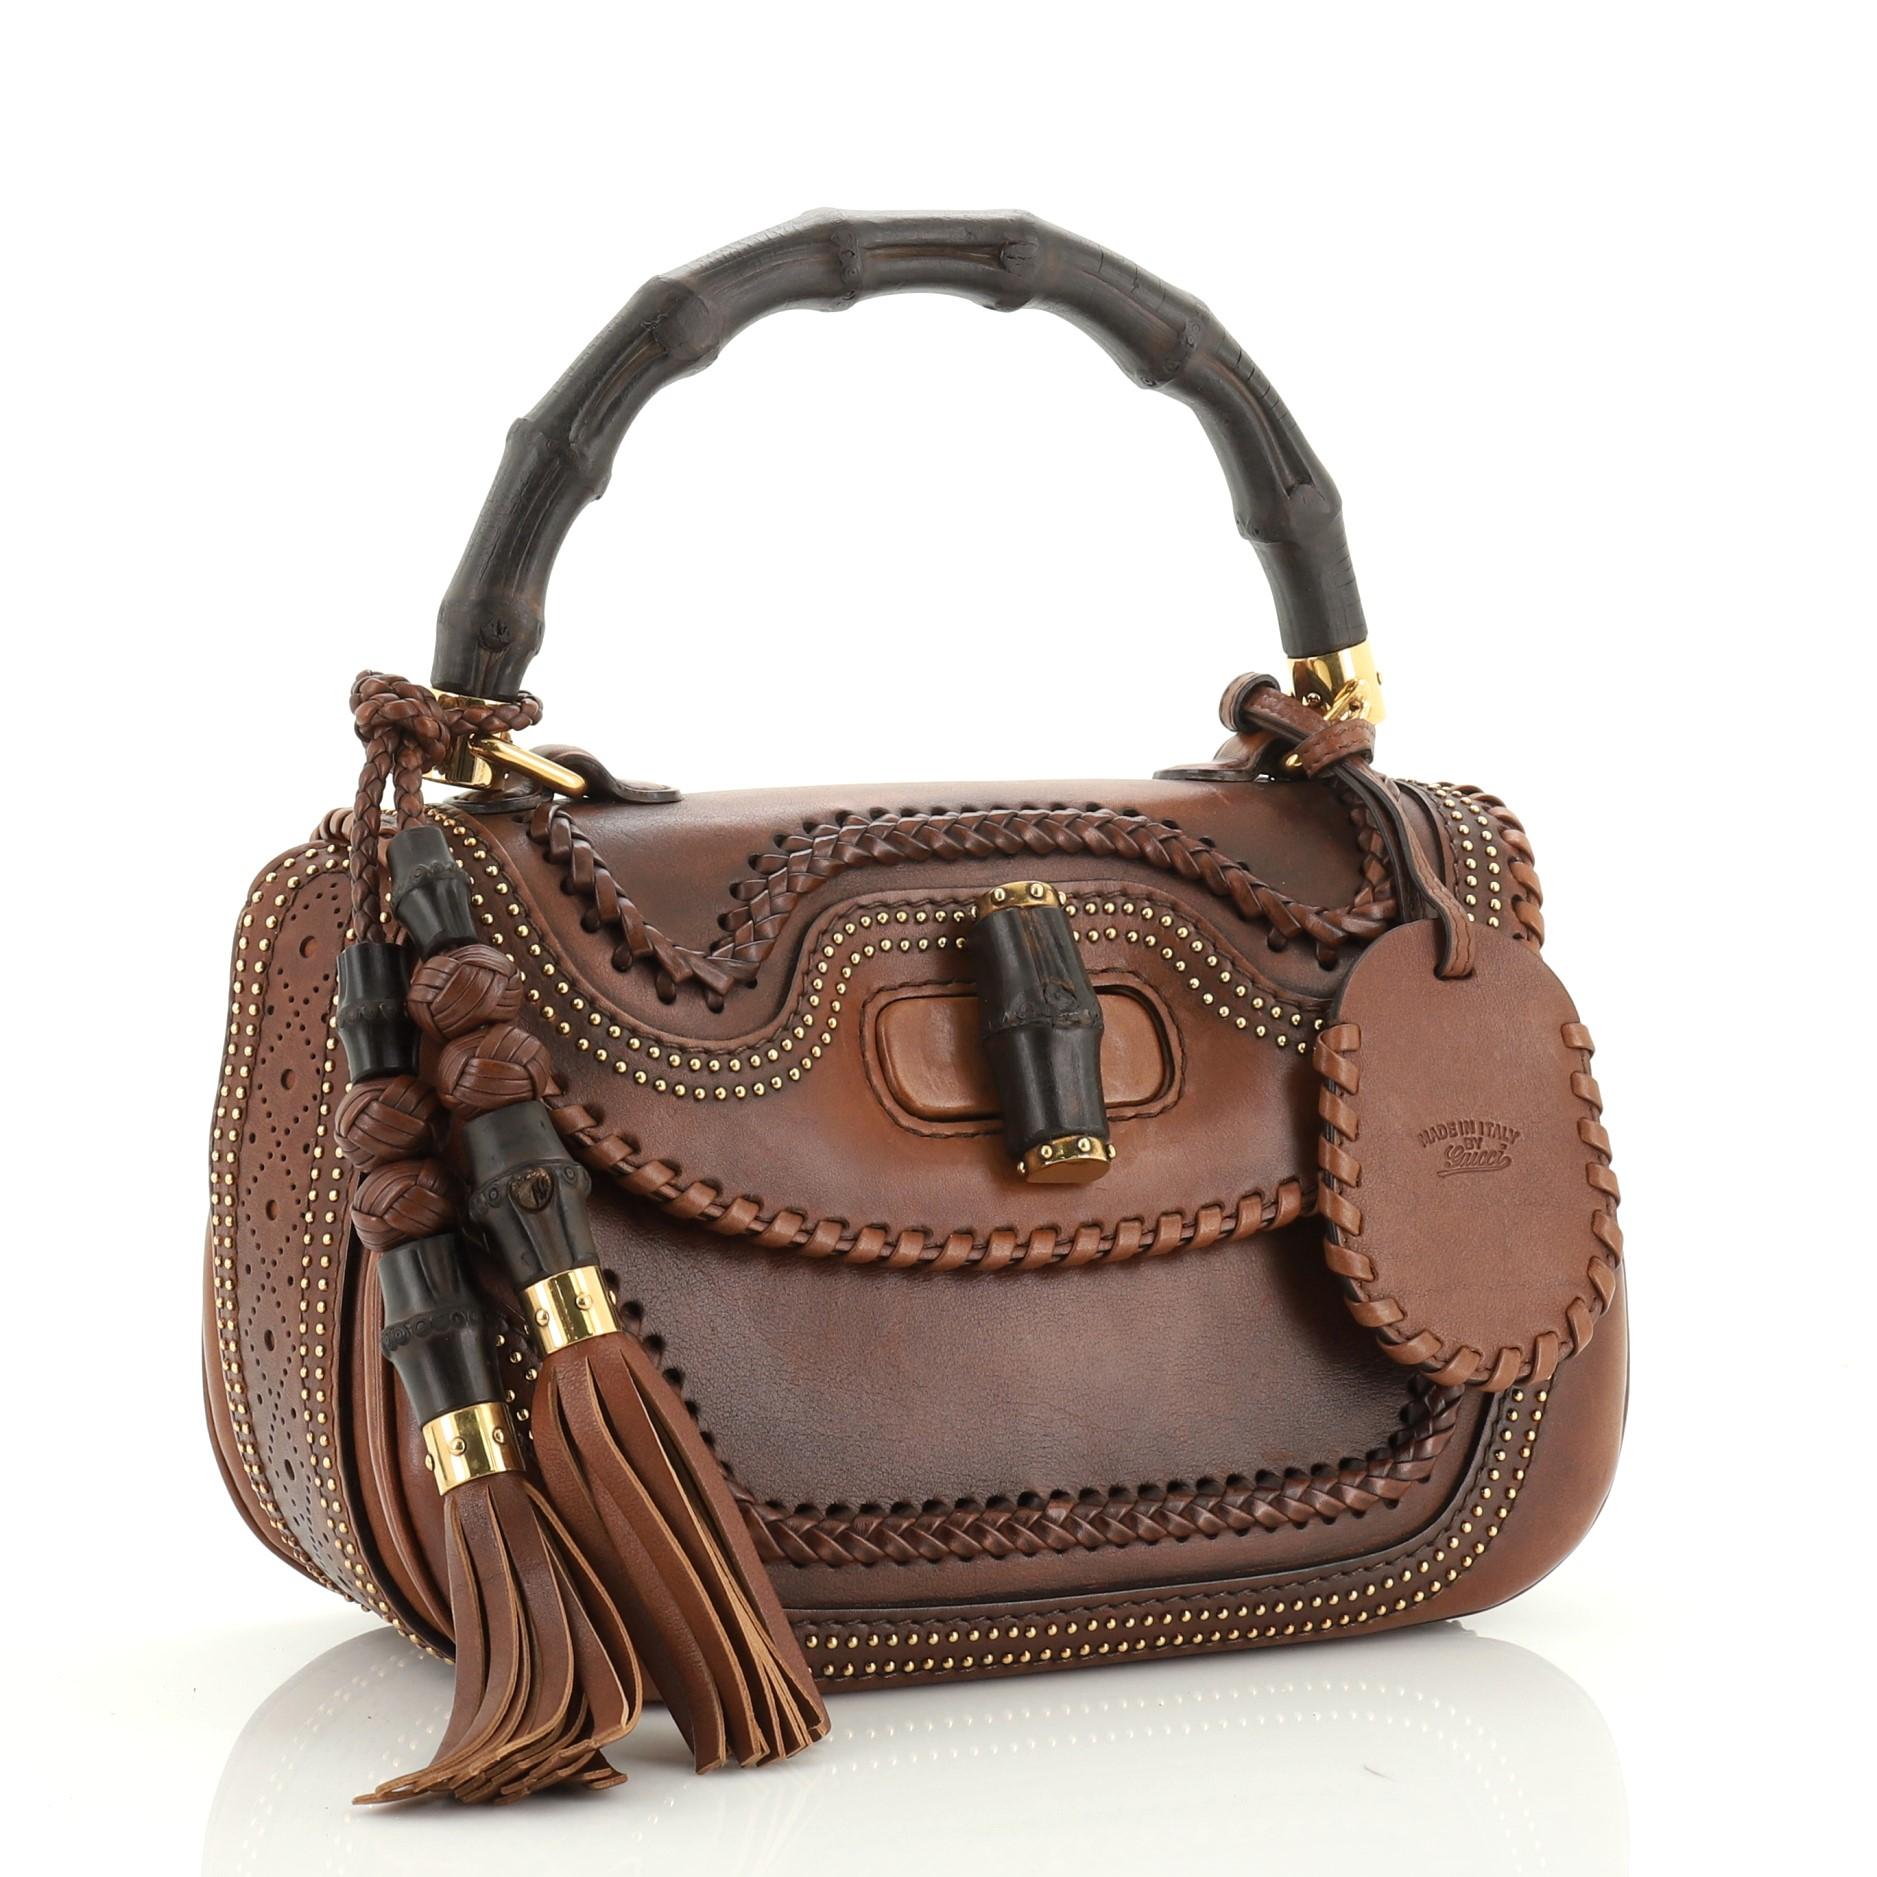 This Gucci New Bamboo Top Handle Bag Studded Leather Medium, crafted from brown leather, features a bamboo top handle, whipstitch and stud detailing, and gold-tone hardware. Its bamboo turn-lock closure opens to a brown microfiber interior with side